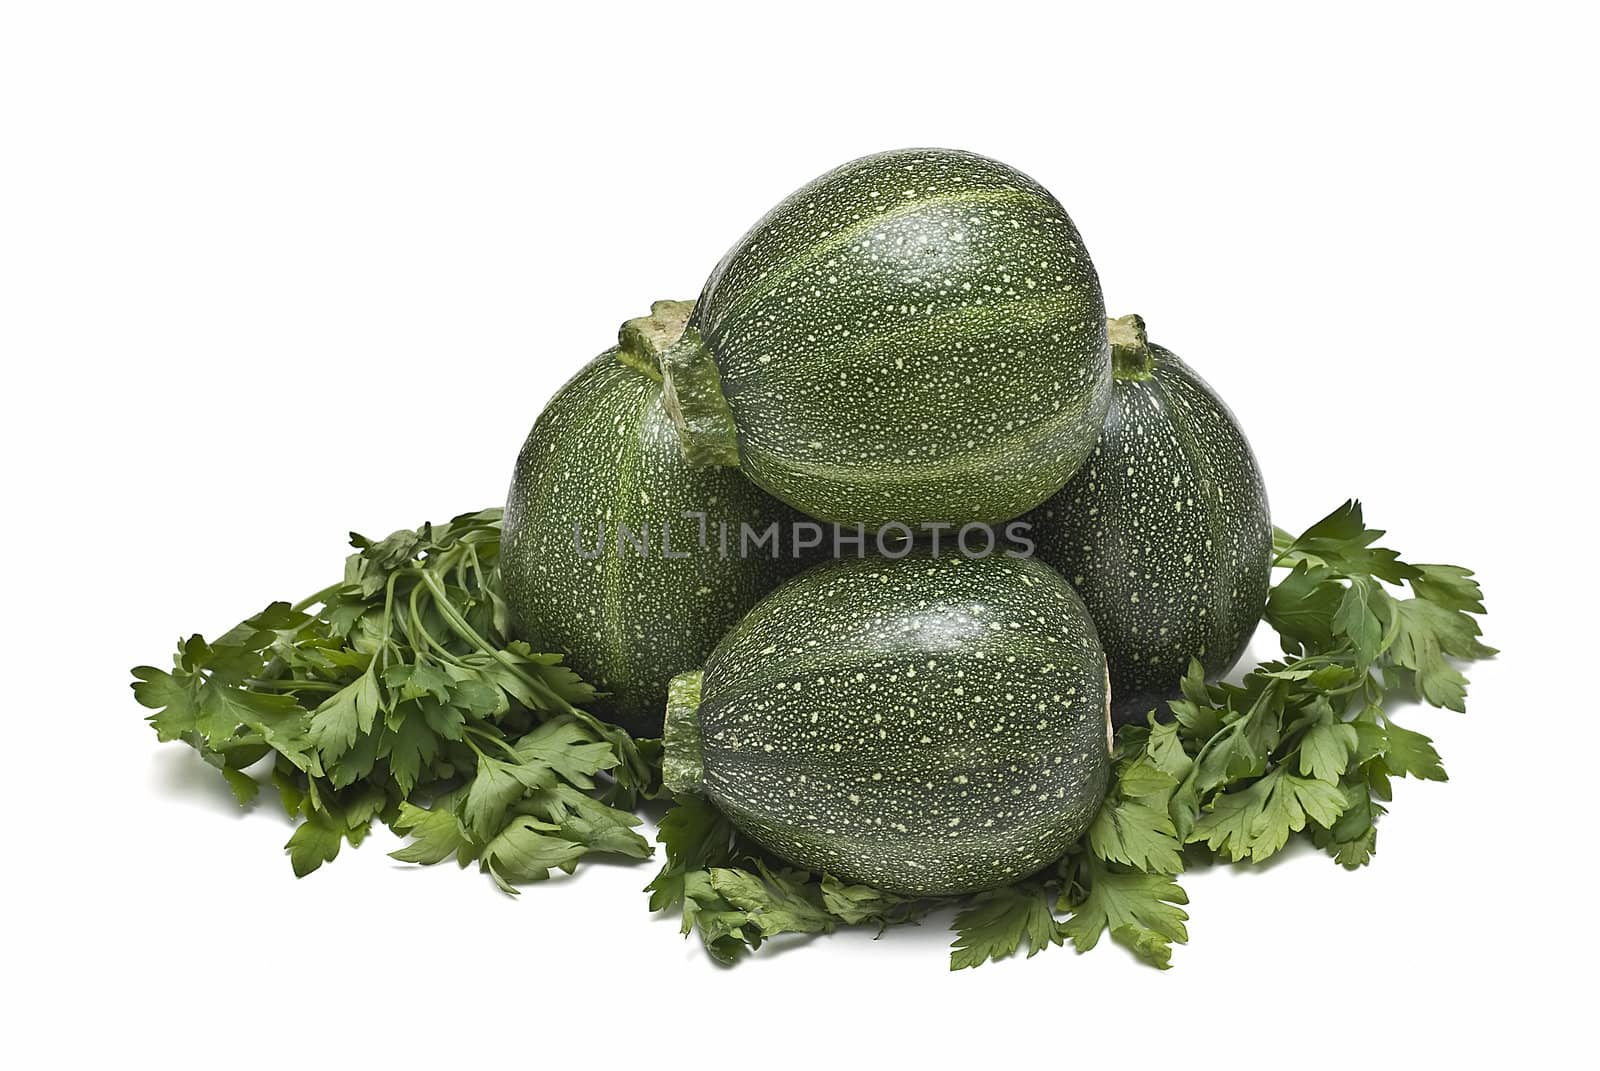 Round zucchini isolated on a white background.